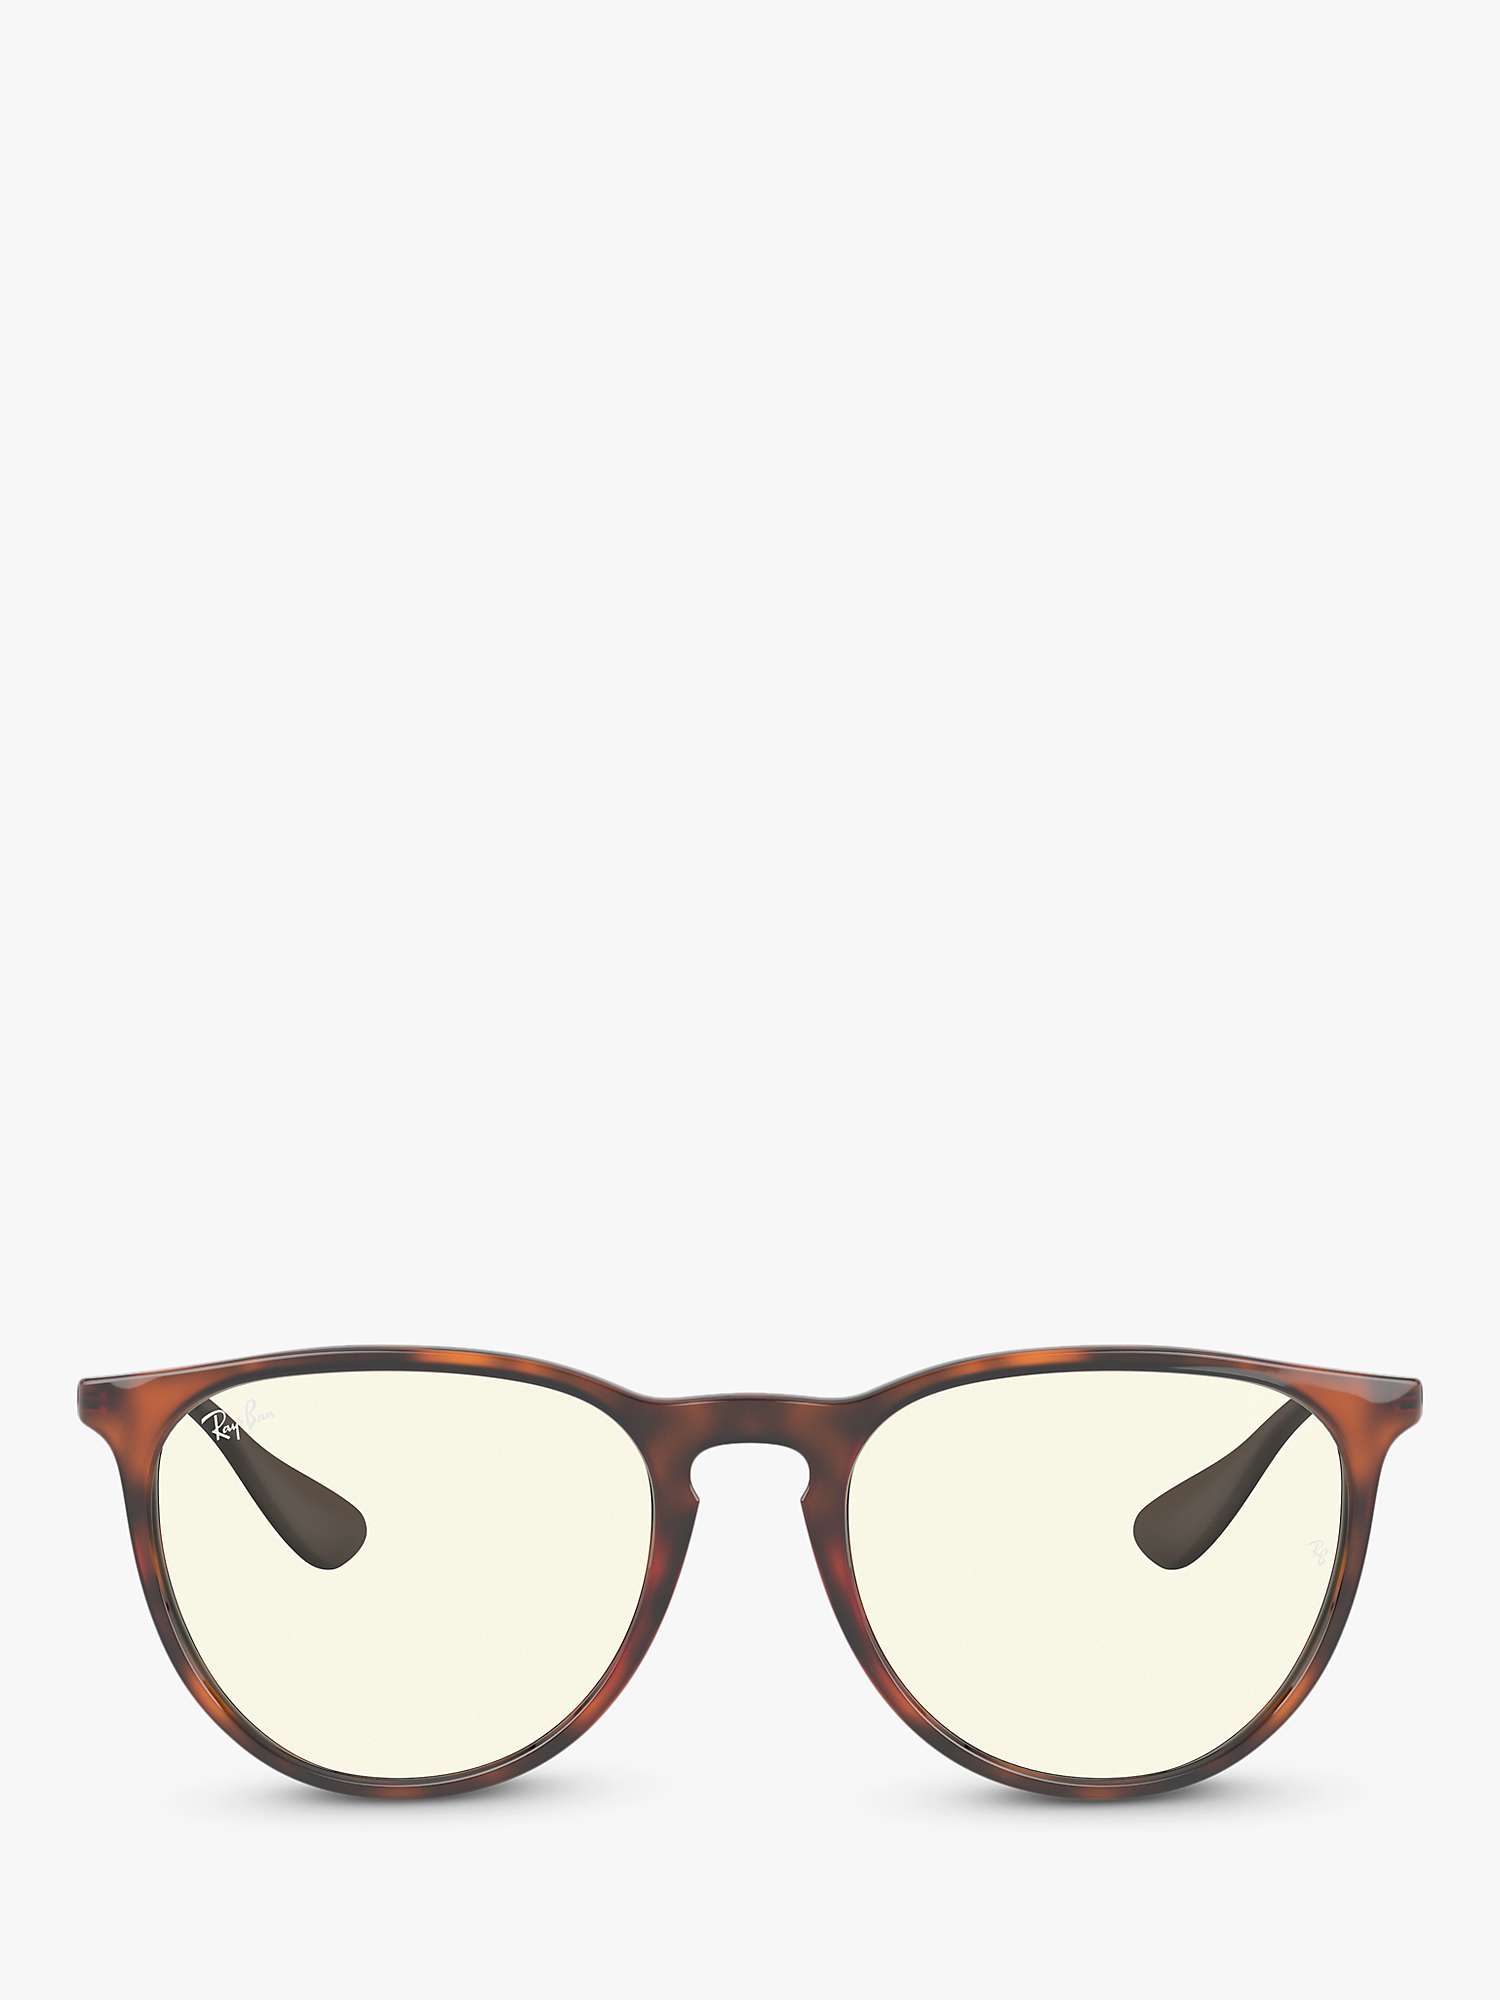 Buy Ray-Ban RB4171 Women's Square Tortoise Shell Sunglasses, Mid Brown Online at johnlewis.com